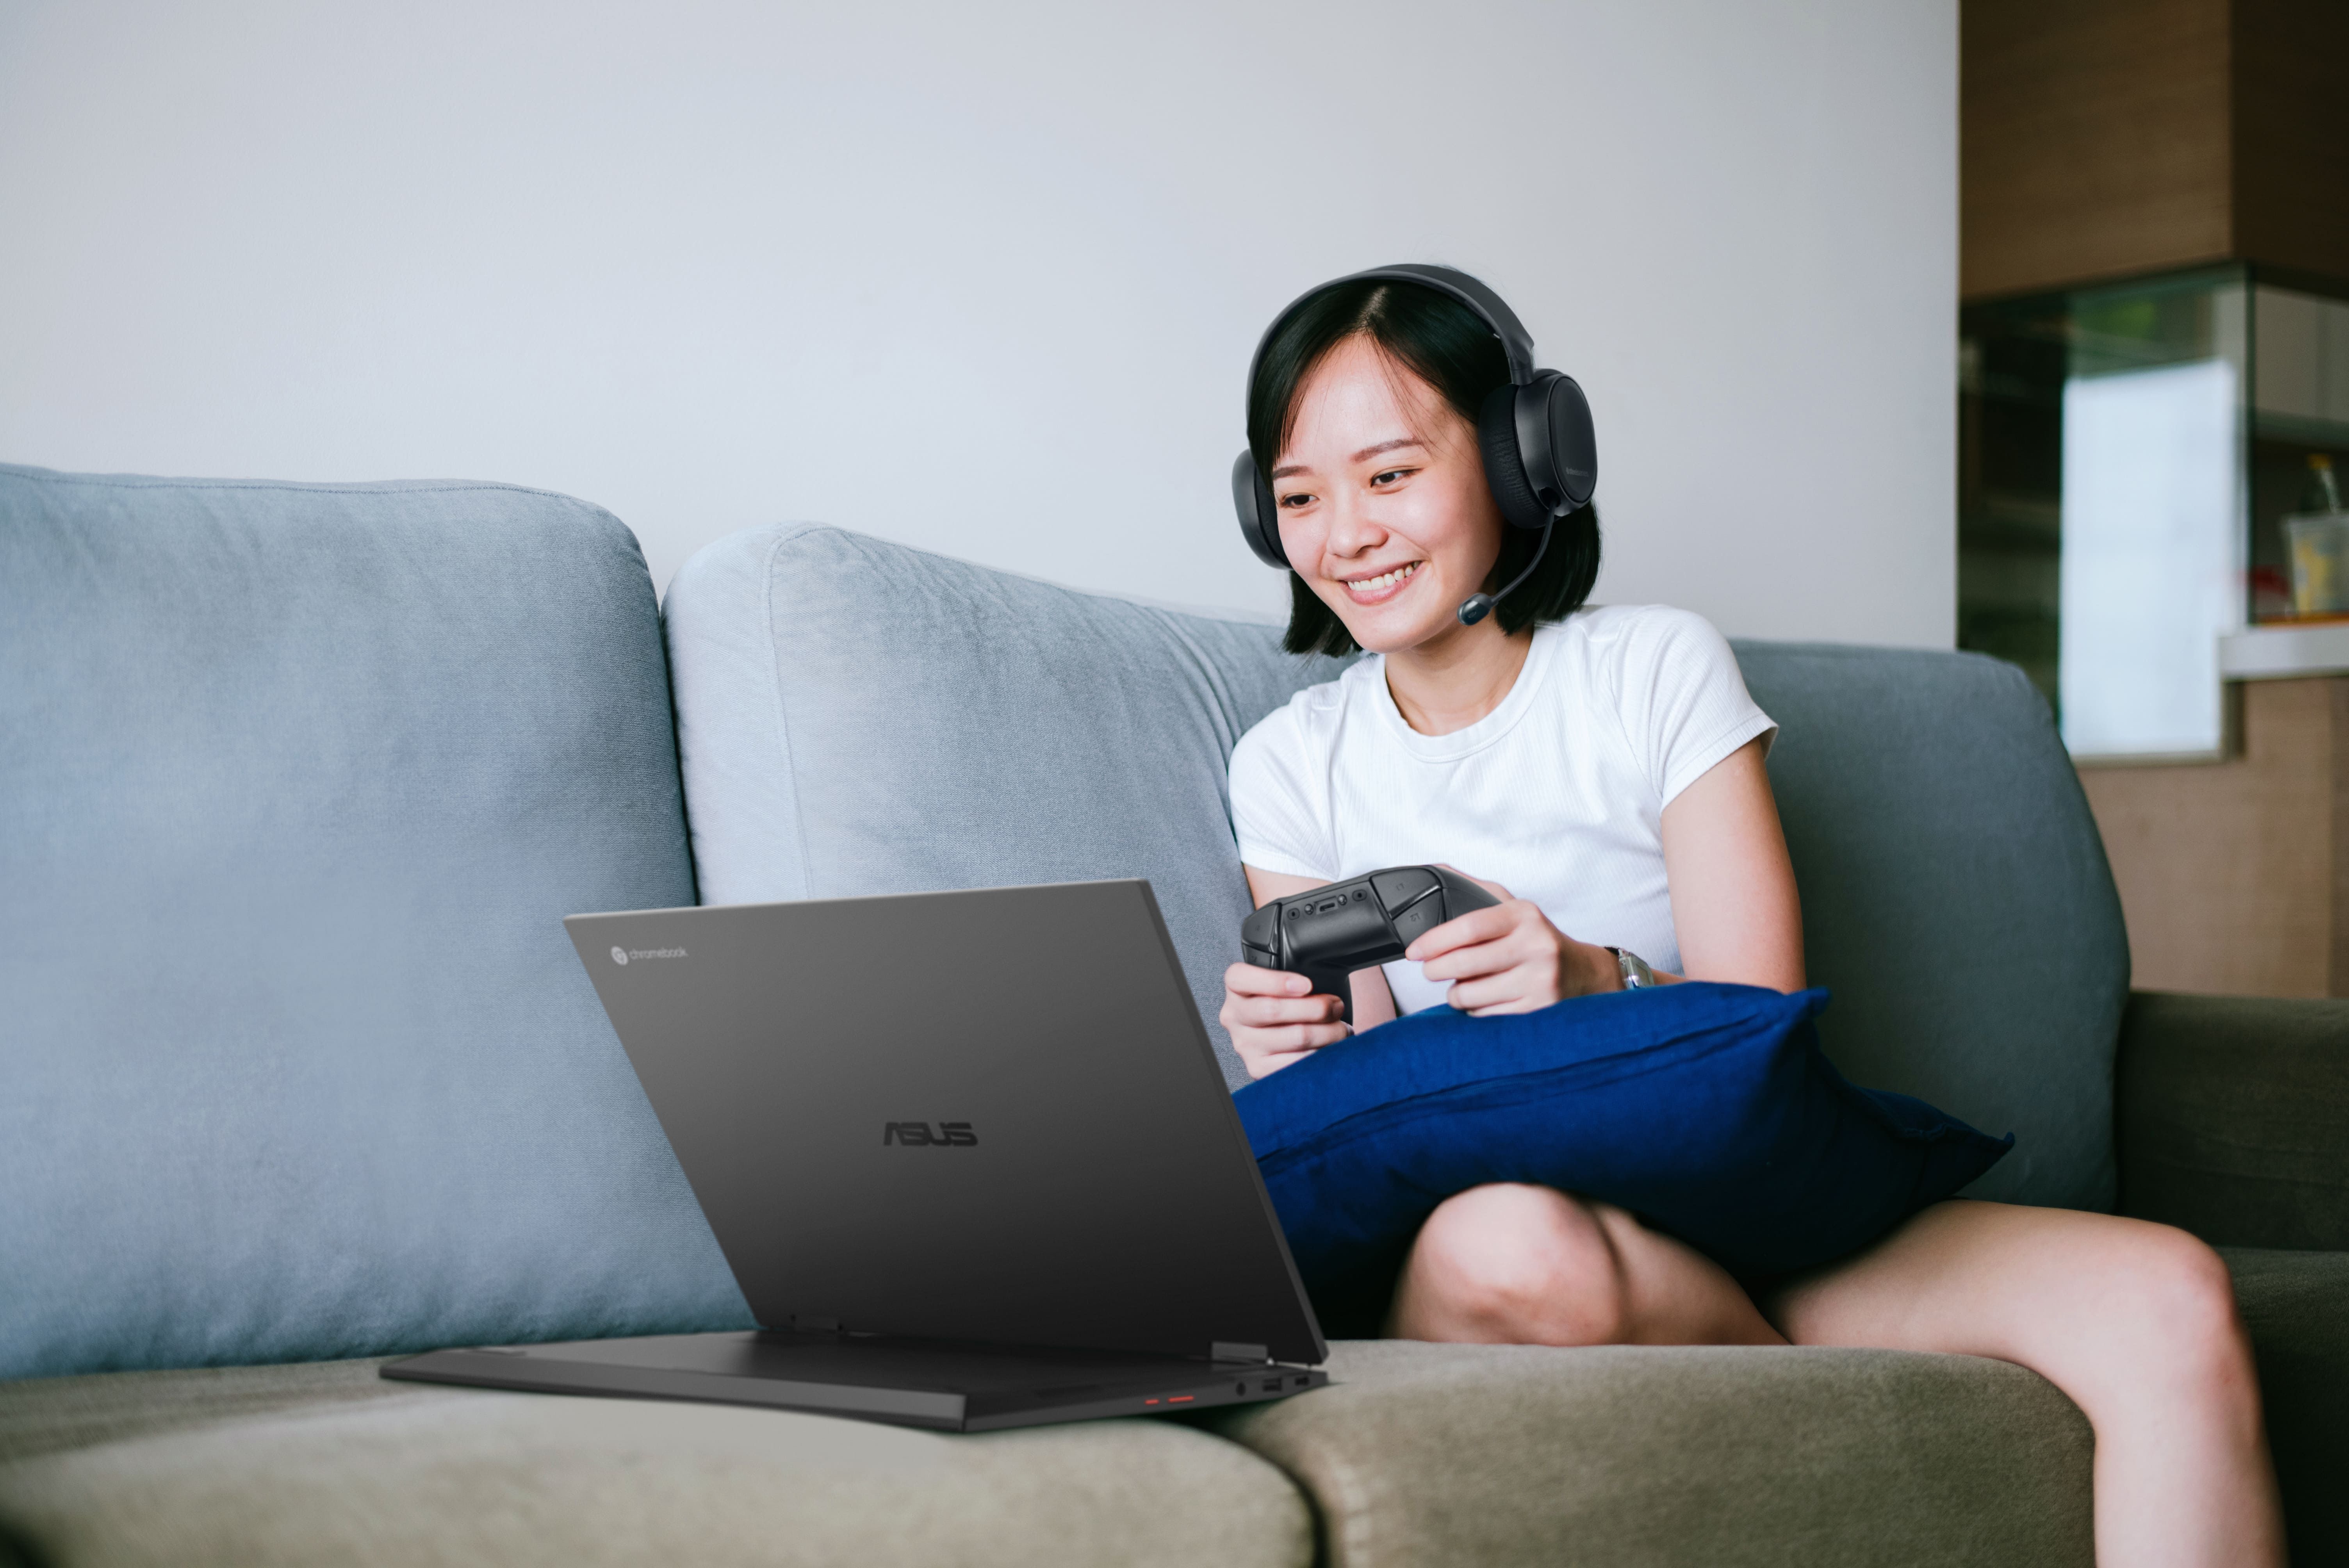 A woman wears headphones and a controller in front a of laptop that's tilted back in display mode.